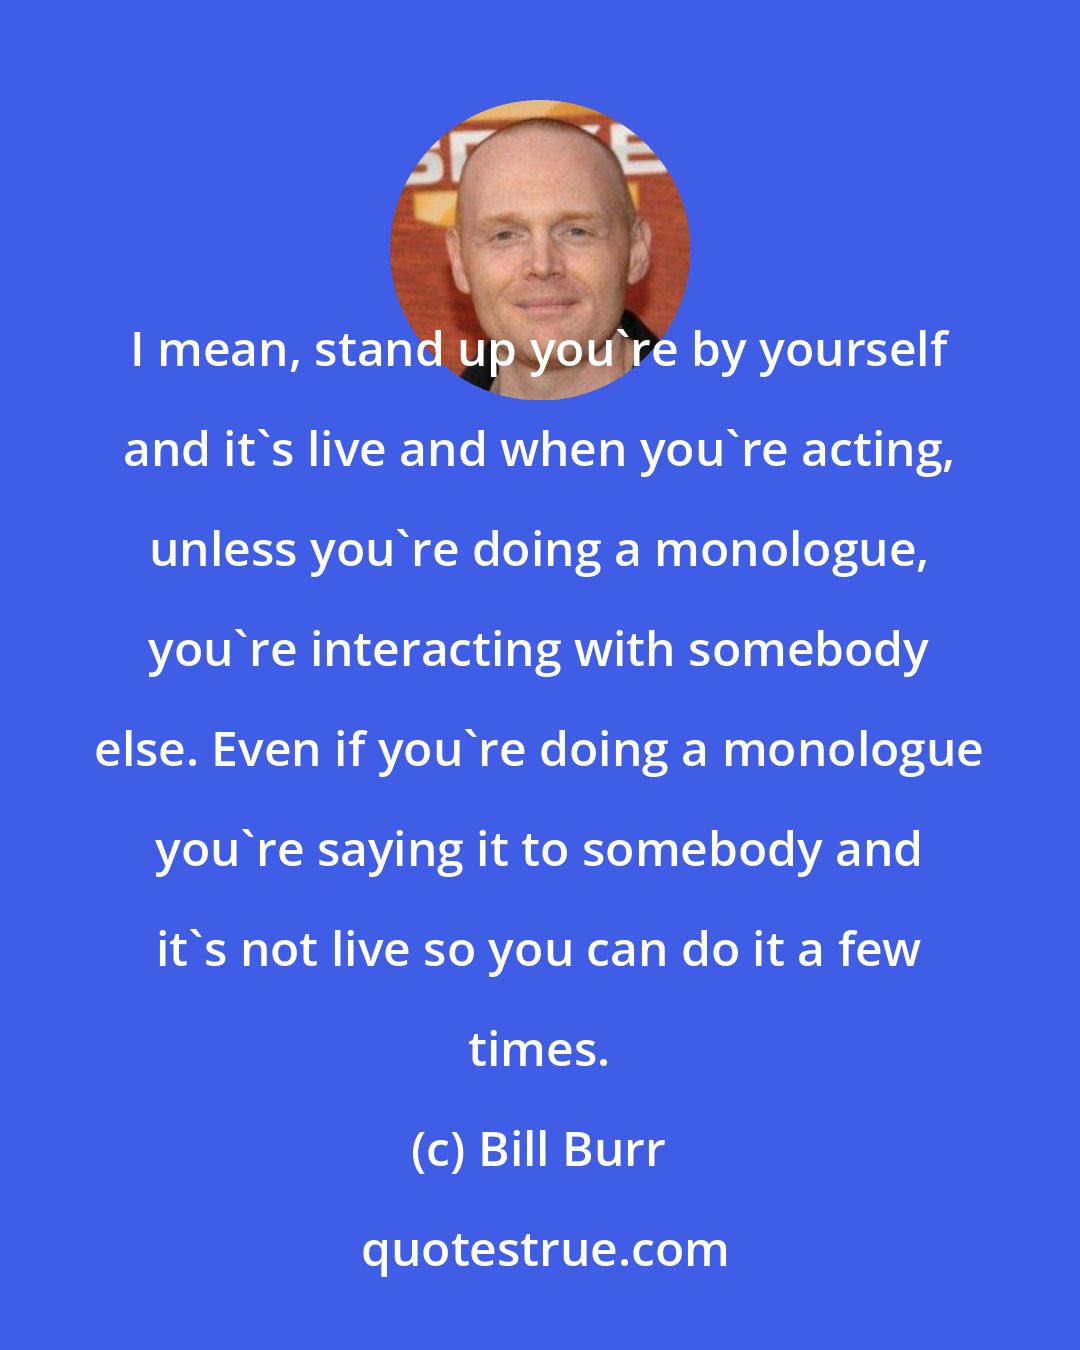 Bill Burr: I mean, stand up you're by yourself and it's live and when you're acting, unless you're doing a monologue, you're interacting with somebody else. Even if you're doing a monologue you're saying it to somebody and it's not live so you can do it a few times.